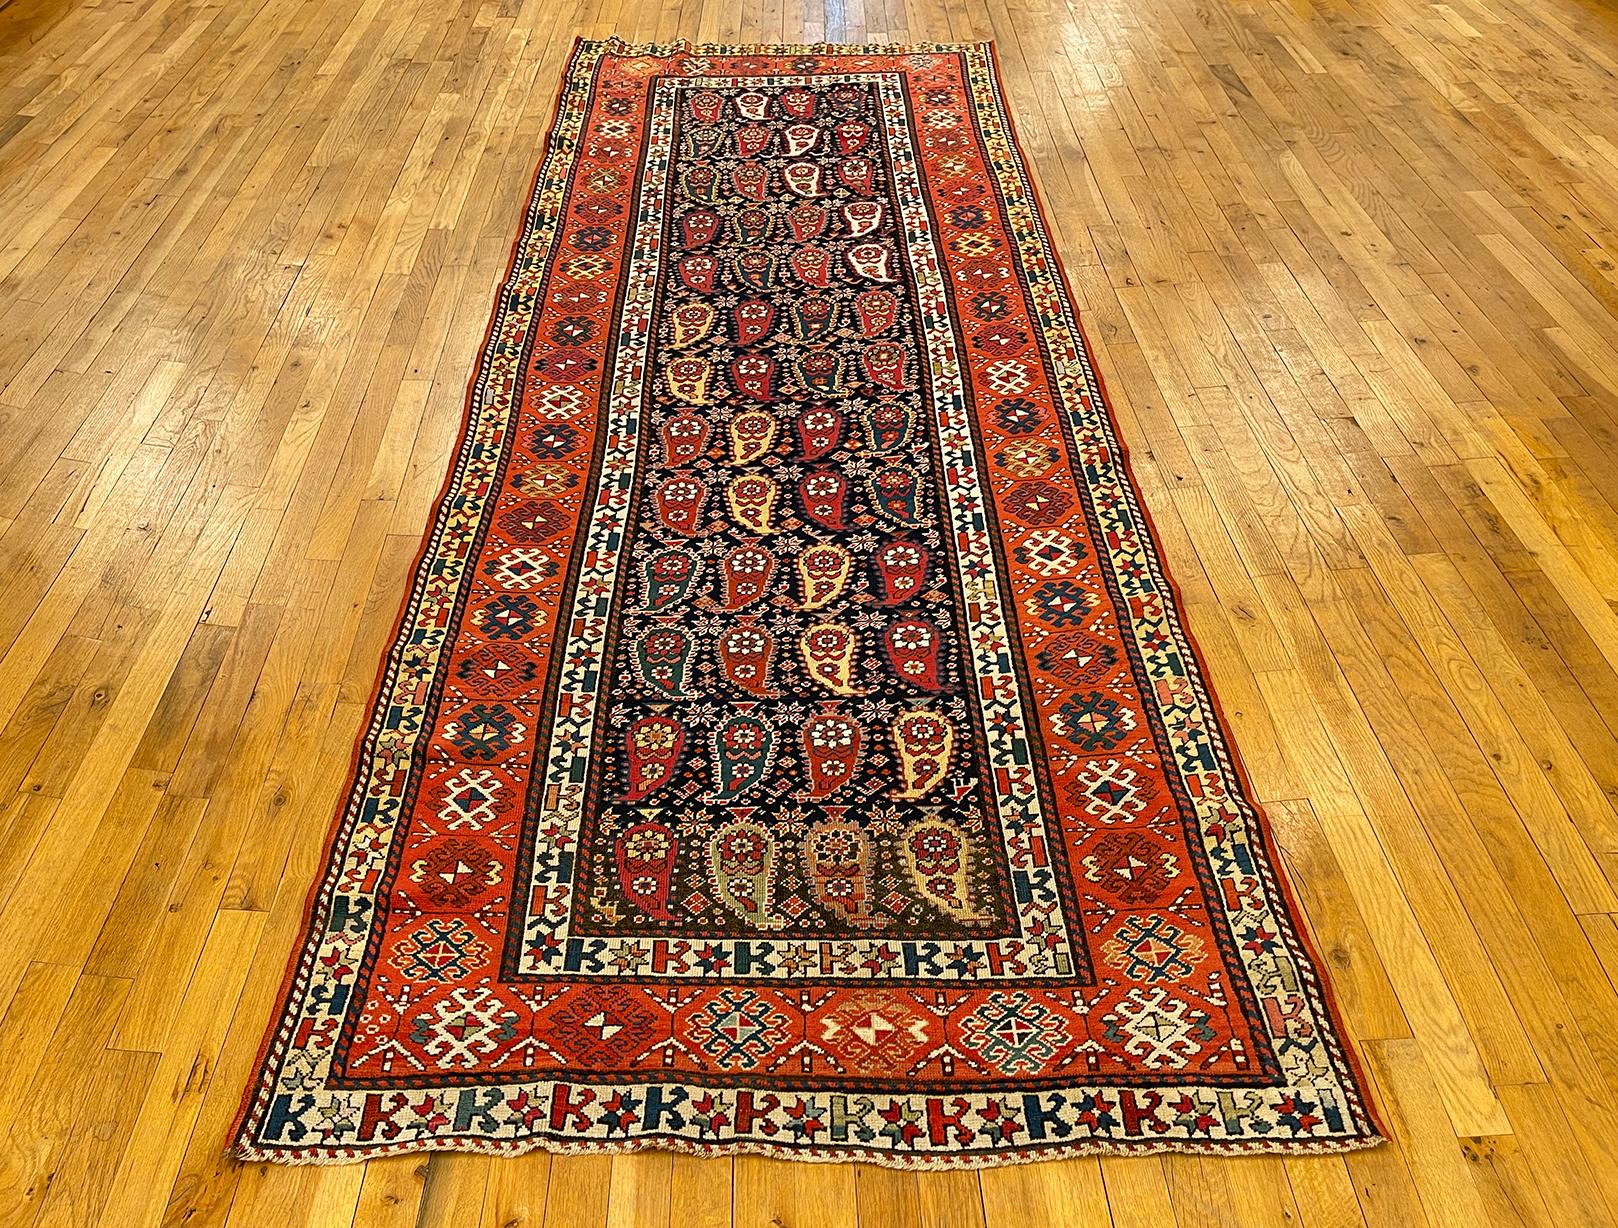 Antique Caucasian Shirvan rug, runner size, circa 1890.

A one-of-a-kind antique Caucasian Shirvan Oriental Carpet, hand-knotted with soft wool pile. This lovely rug features a Paisley design allover the blue primary field, with an attractve coral